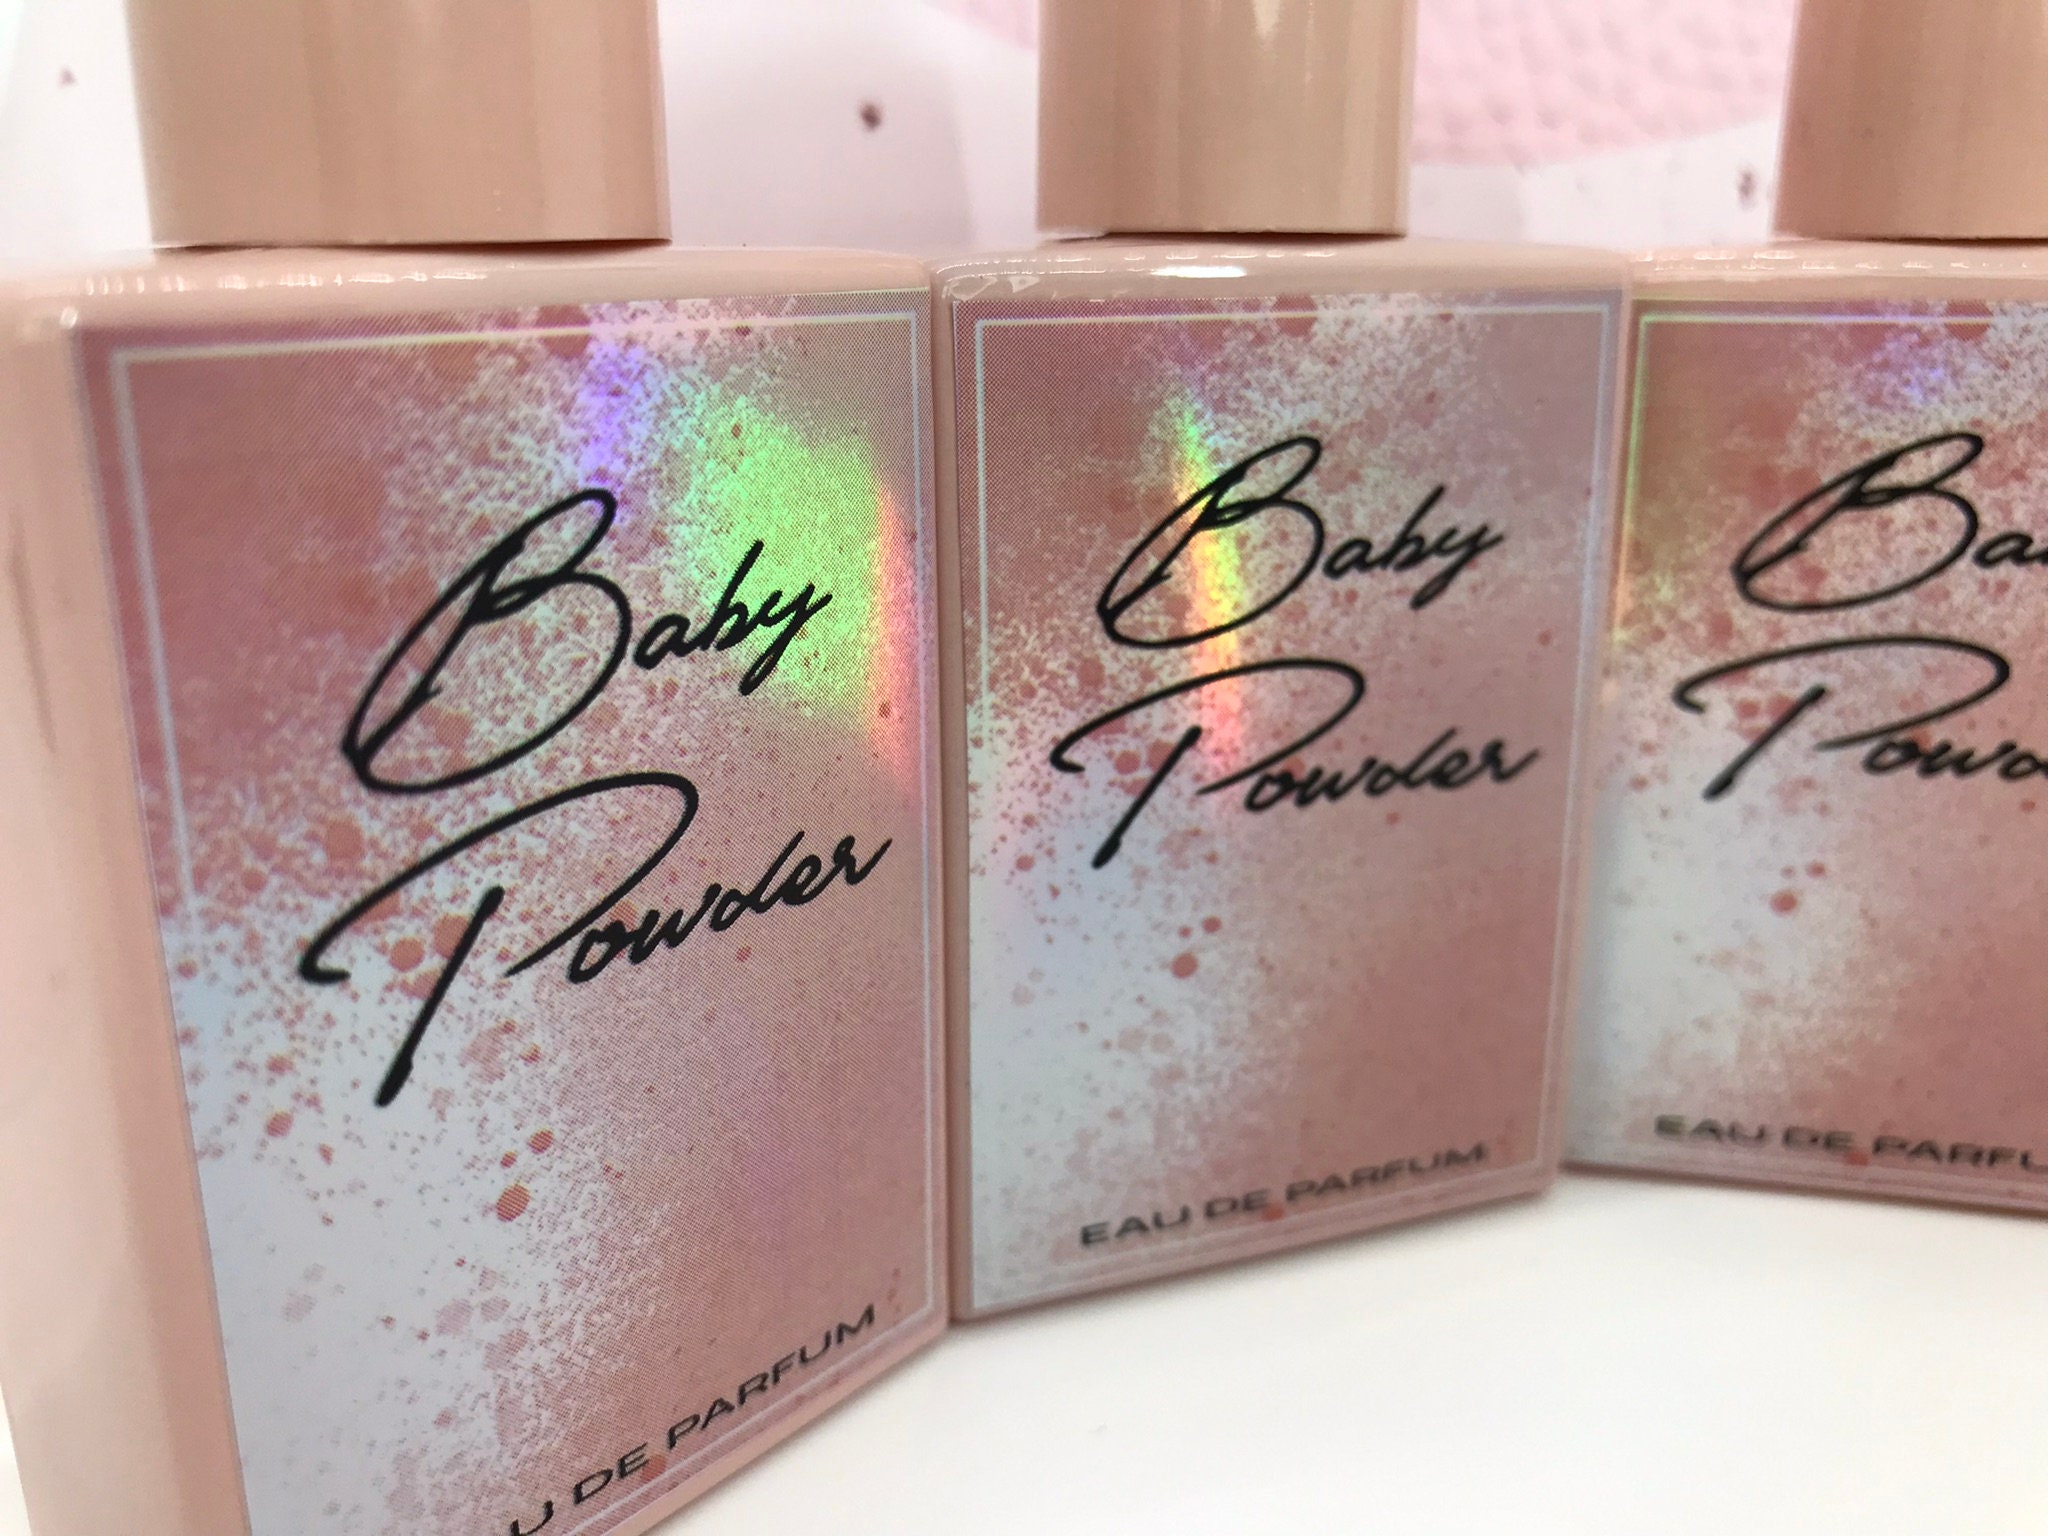 One might think that baby powder is, well, just for babies. Just think  again! Perfumes that smell like baby powder have beco…